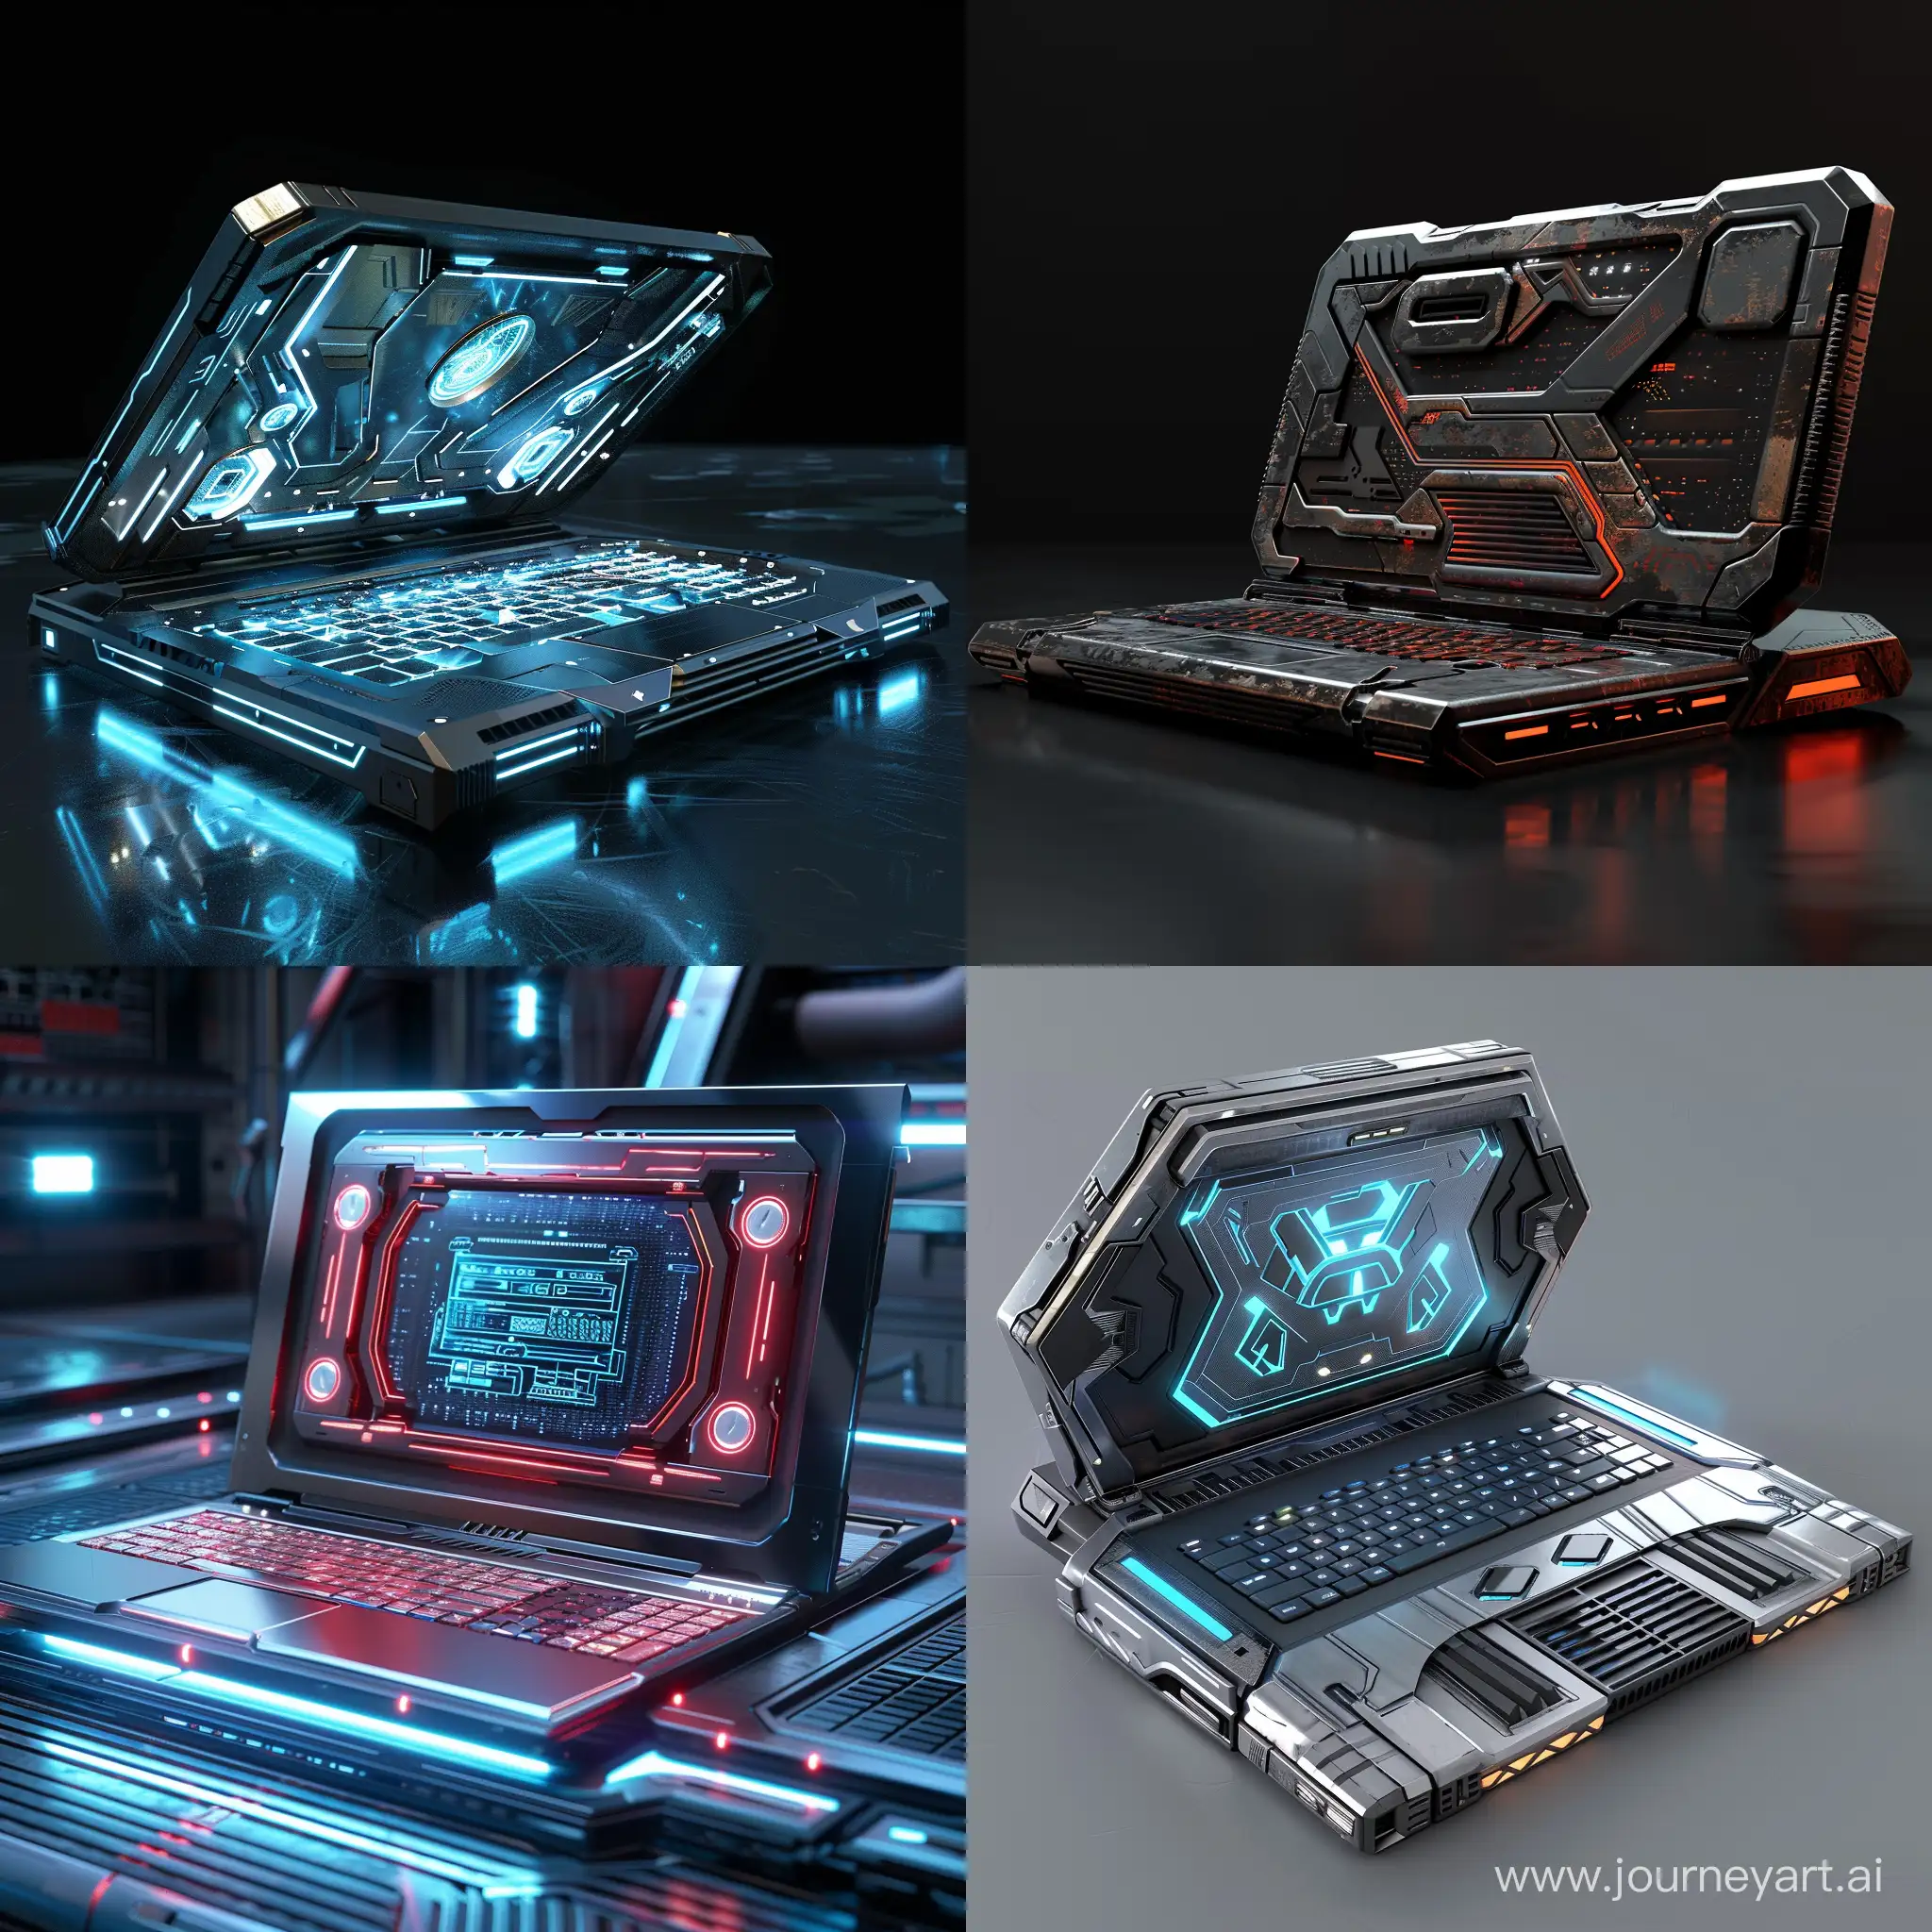 Futuristic-Laptop-with-Recycled-Materials-in-HighTech-World